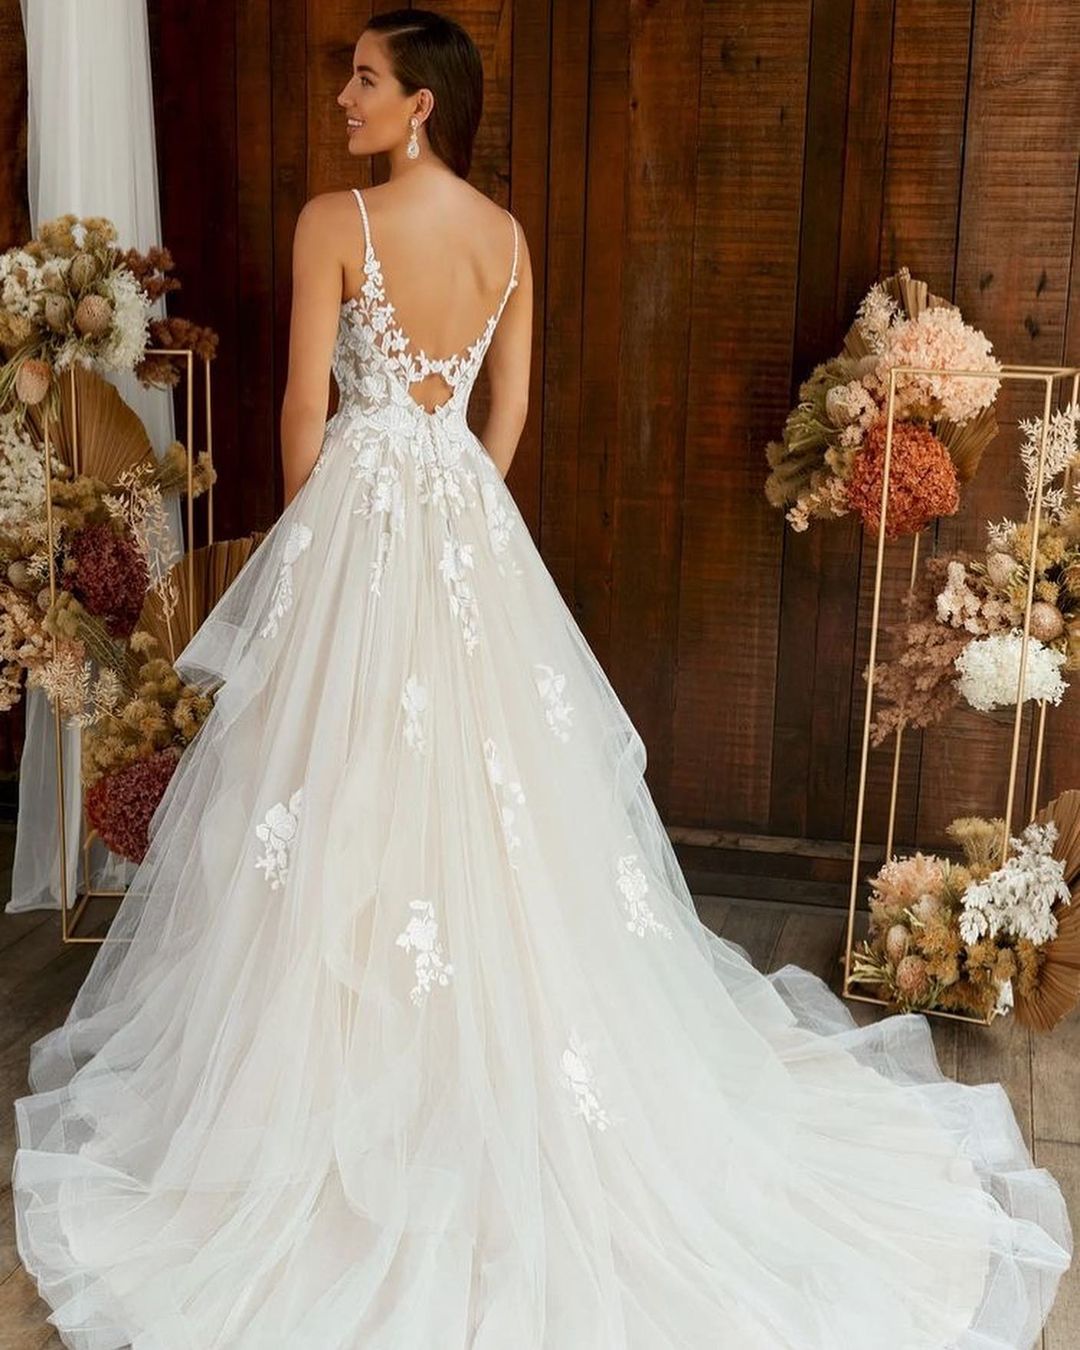 luxe bridal dress shop in ohio